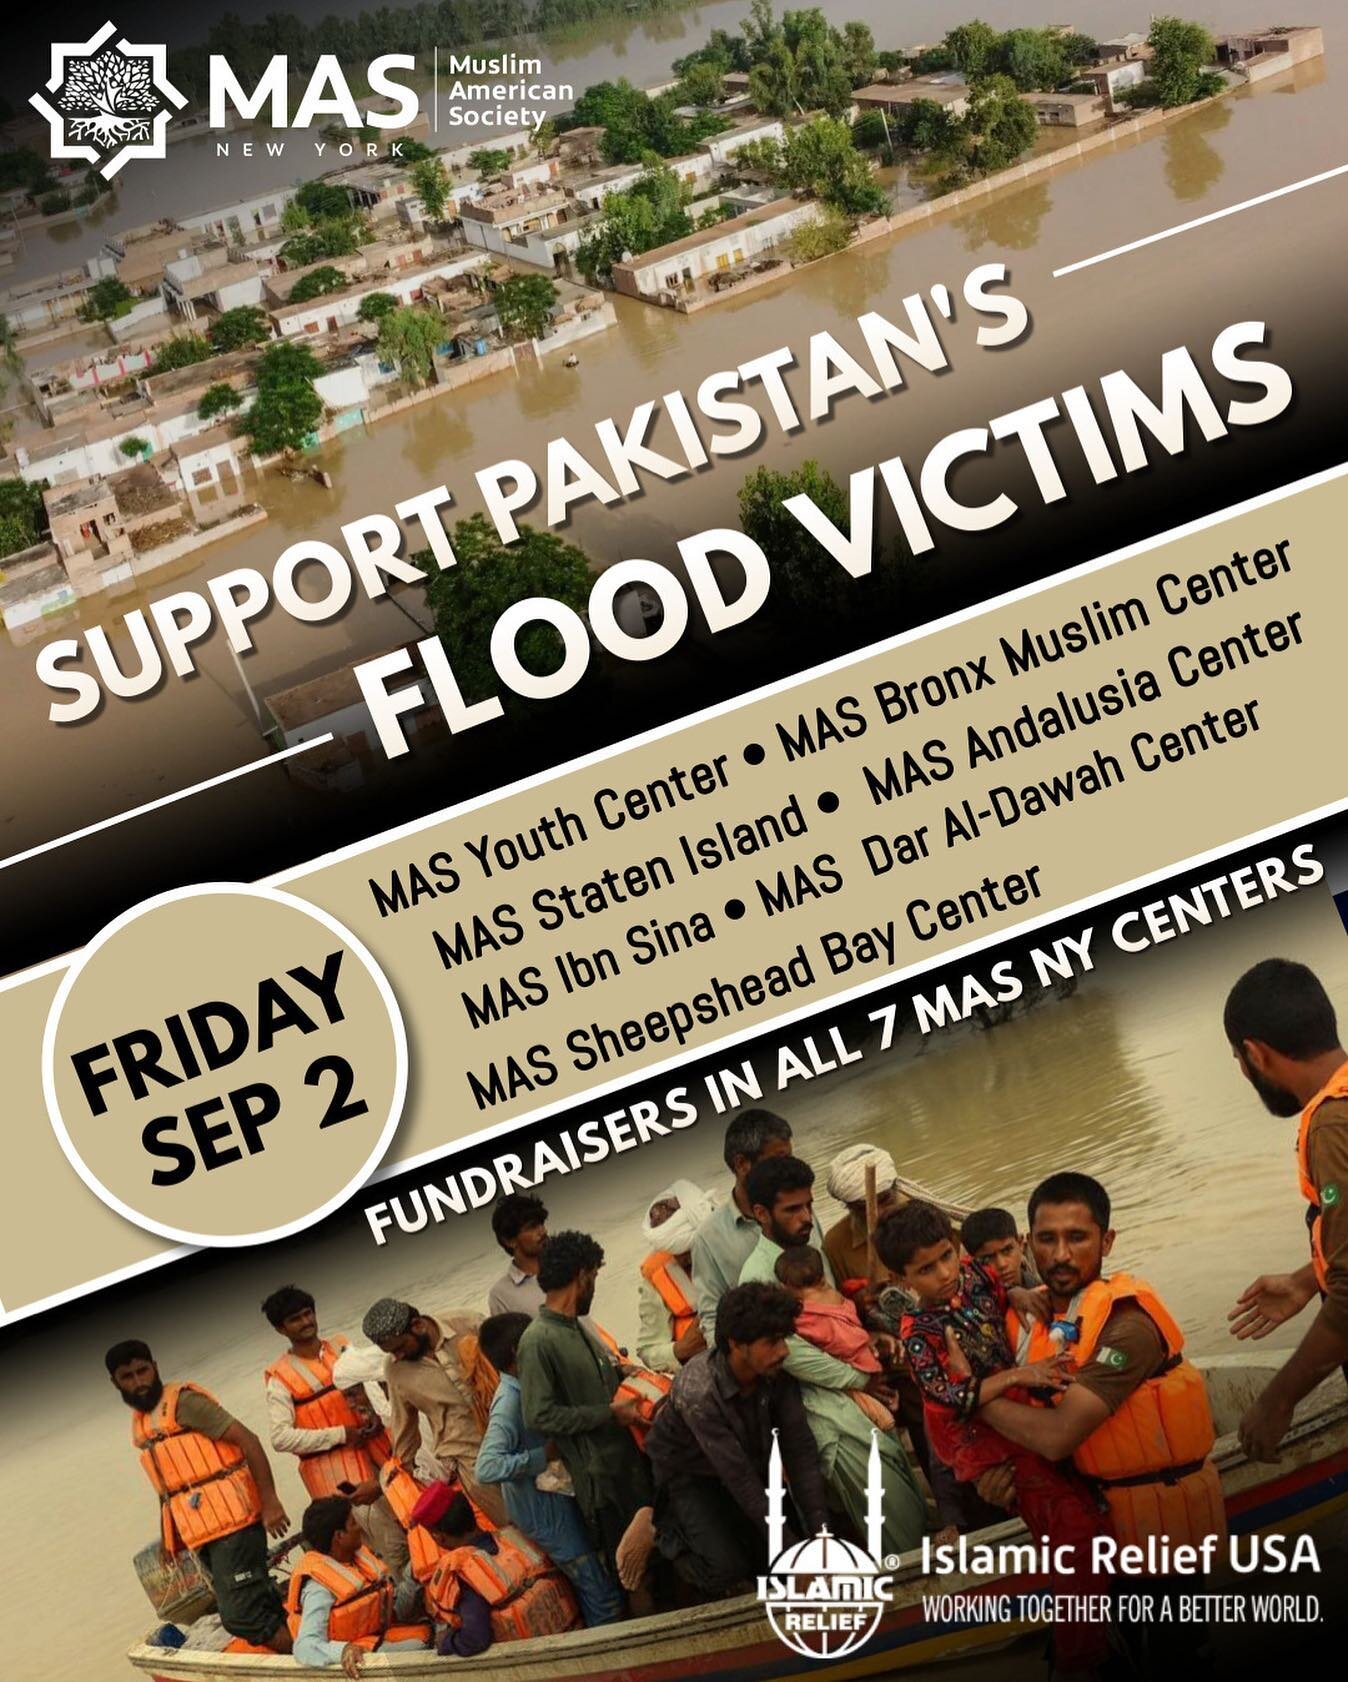 MAS NY will be holding emergency fundraisers for Pakistan's Flood Victims on Friday, Sep 2, in all our 7 centers across New York: MAS Youth Center (Brooklyn), MAS Staten Island Center, Bronx Muslim Center, MAS Ibn Sina Center (Queens), MAS Andalusia 